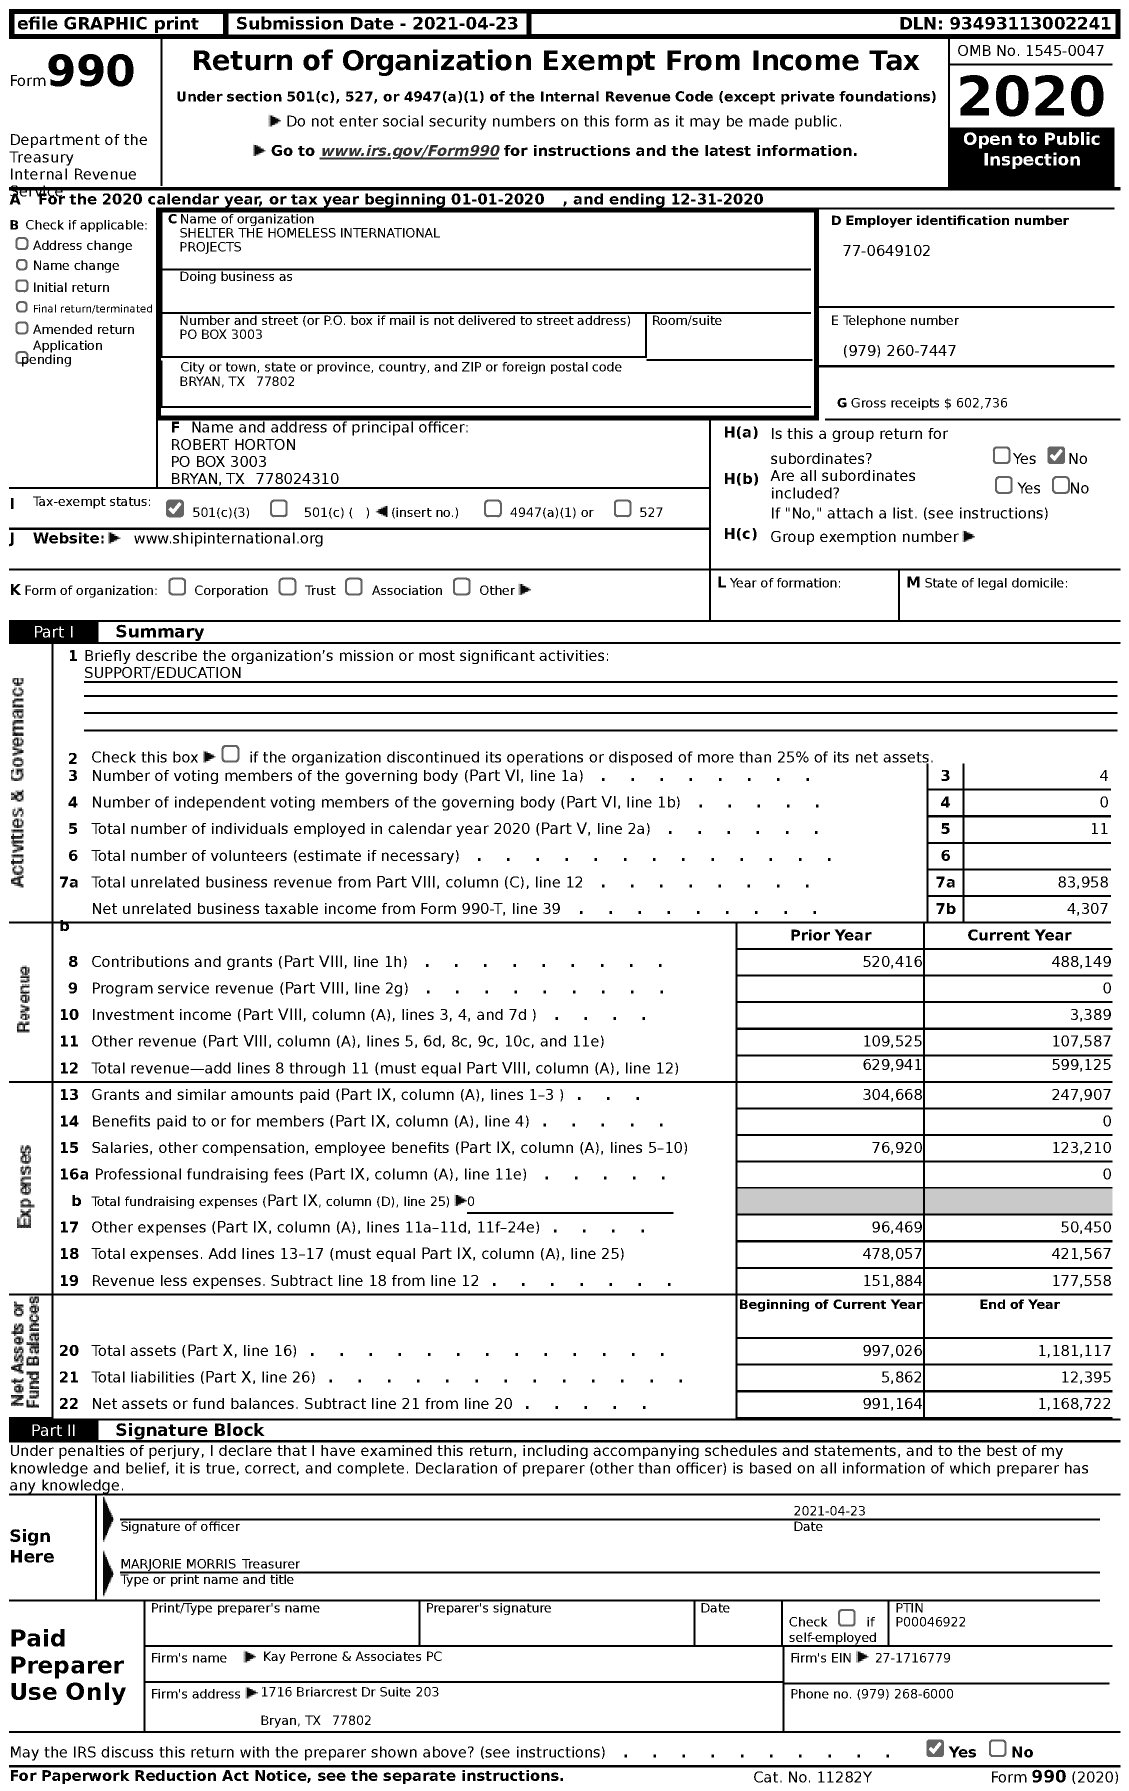 Image of first page of 2020 Form 990 for Shelter the Homeless International Projects